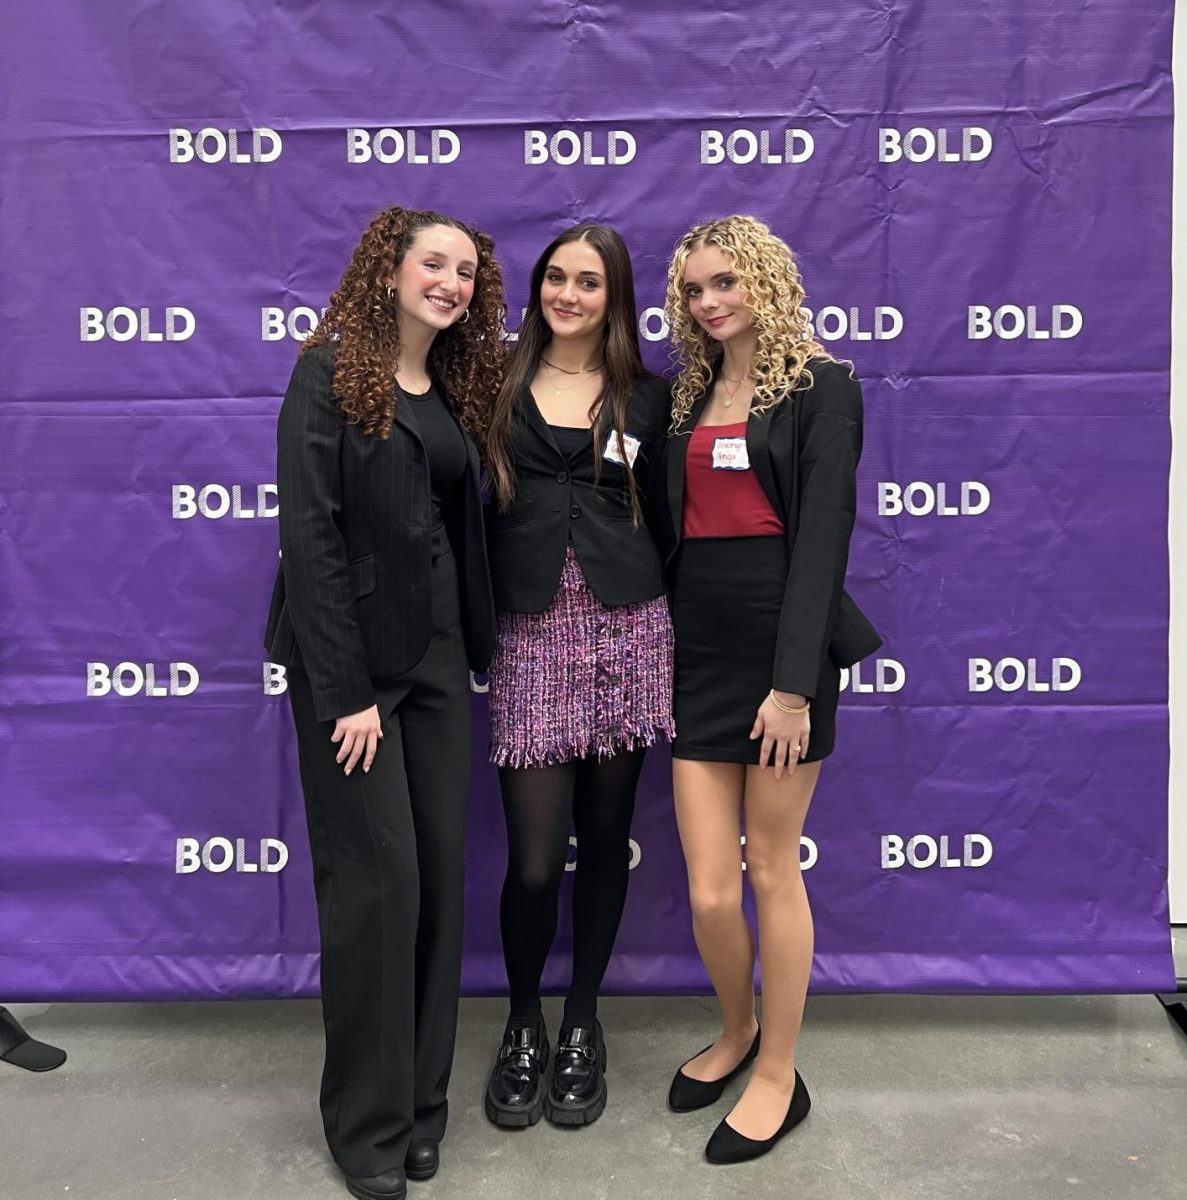 SHS juniors Bailey Young, Savana Garabedian, and Gracelyn Veiga attended a womens business conference at Harvard University in November